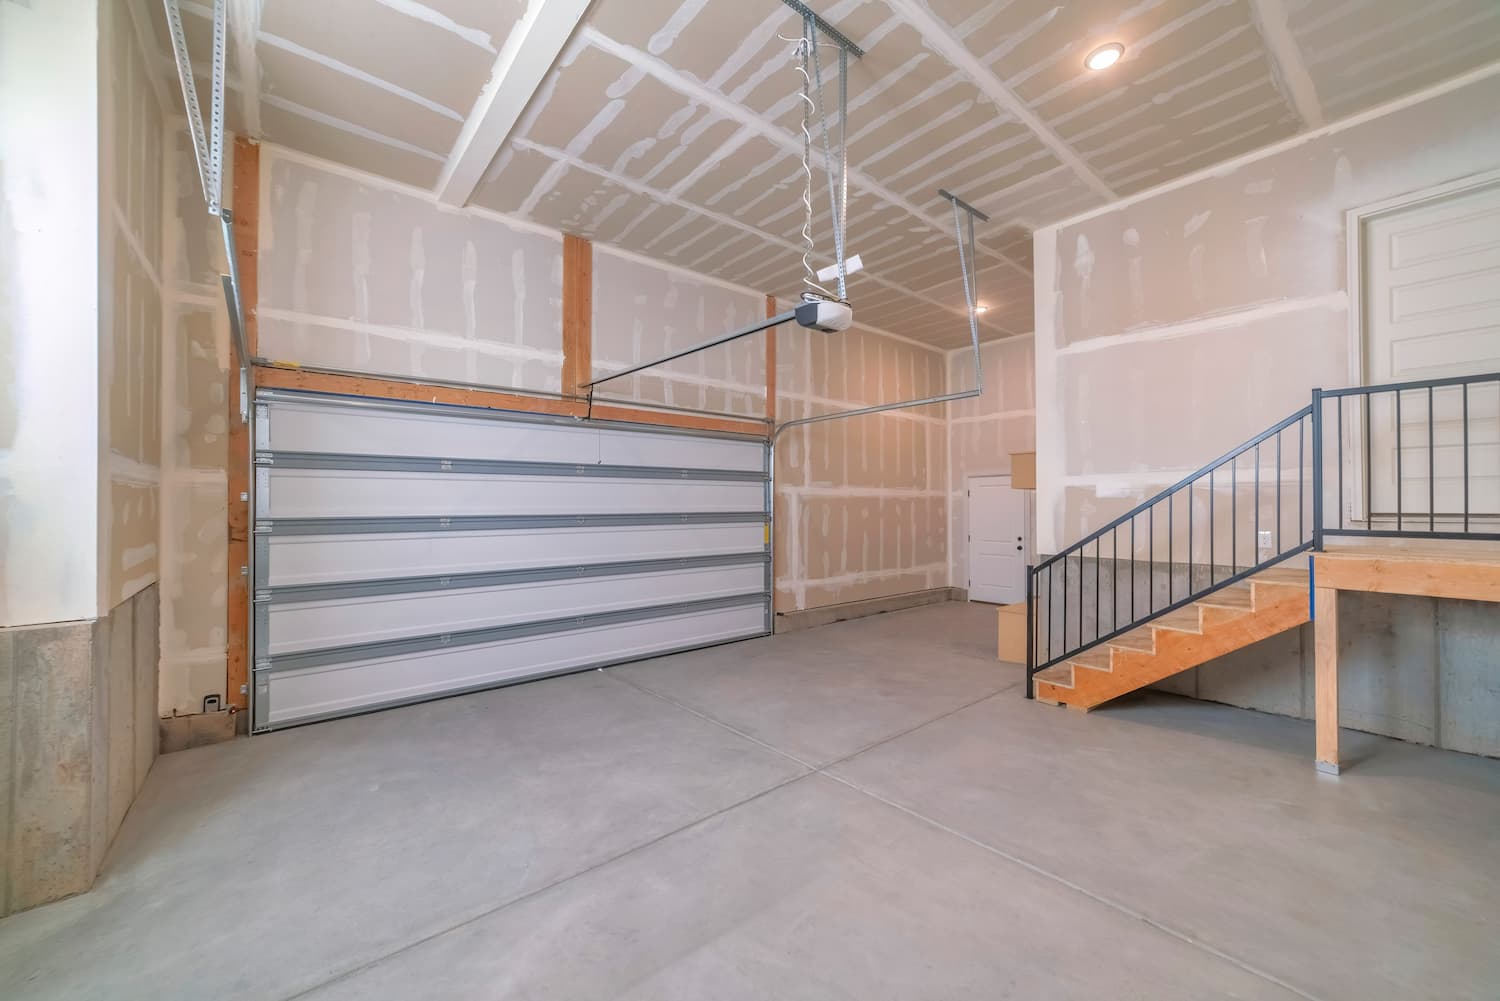 Sectional garage doors have many horizontal panels that take up less space when moving up or into place. A view of a sectional garage door from inside a newly built garage.